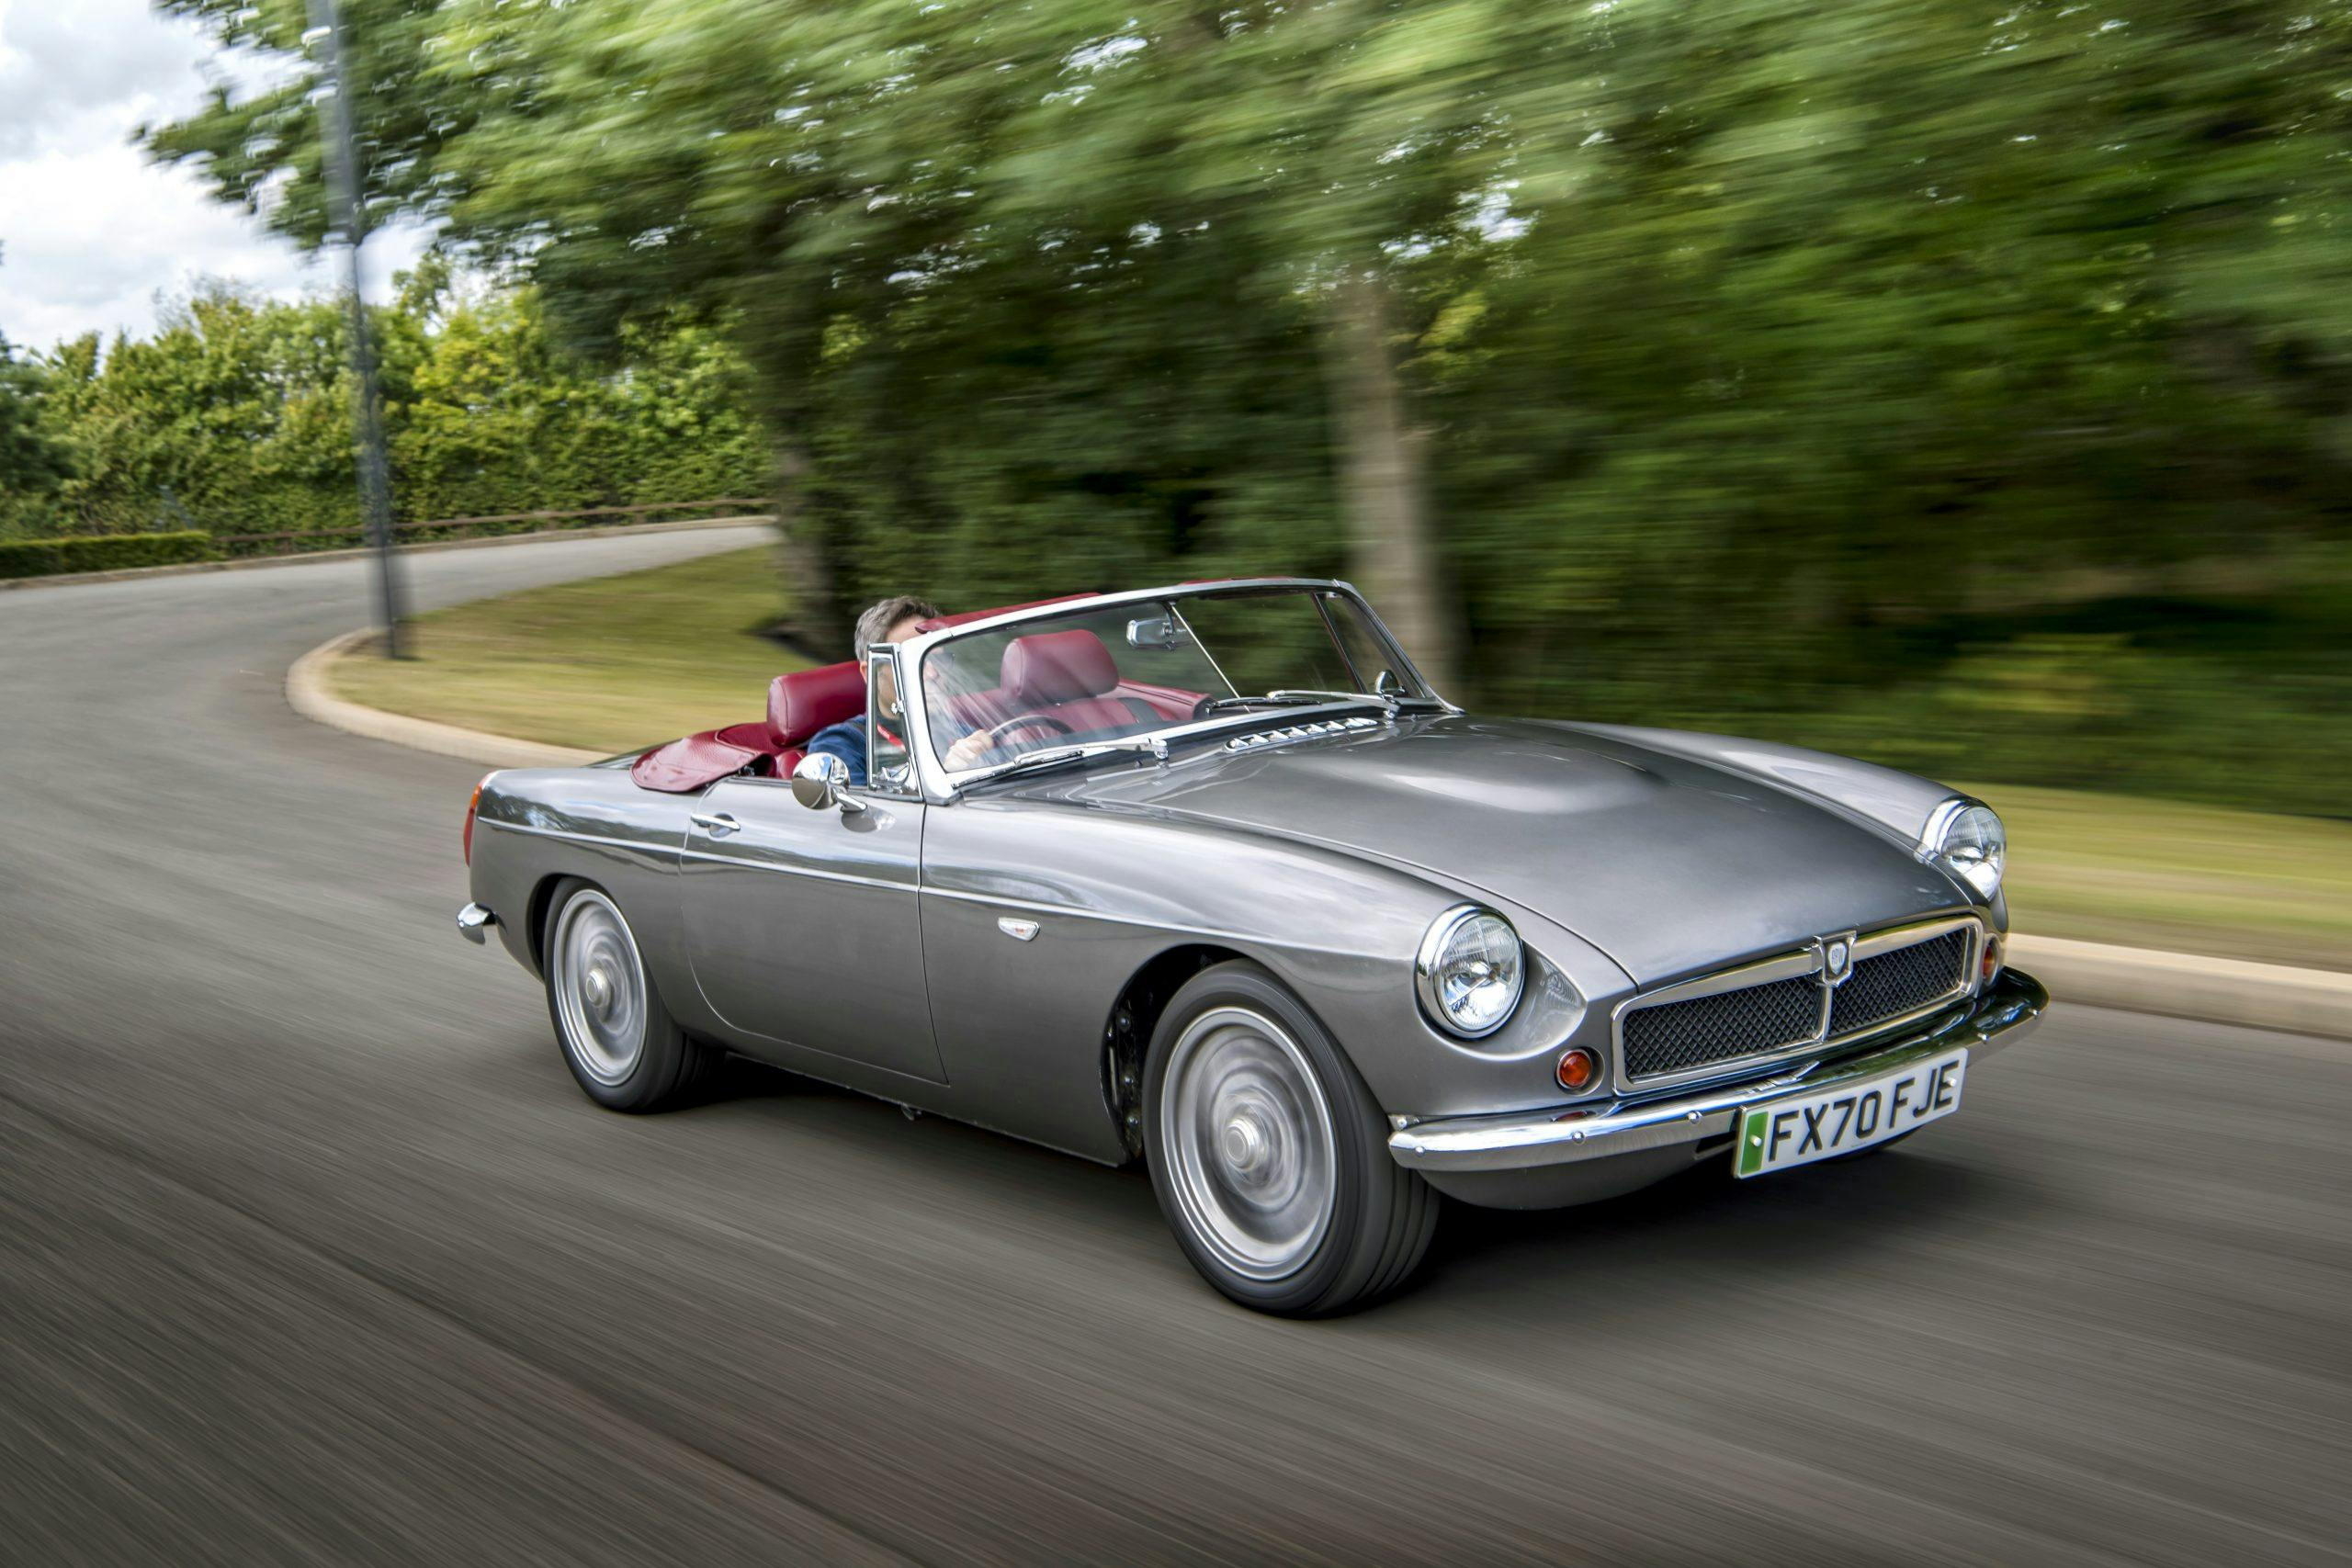 Driving an electric MGB roadster is a breath of fresh air